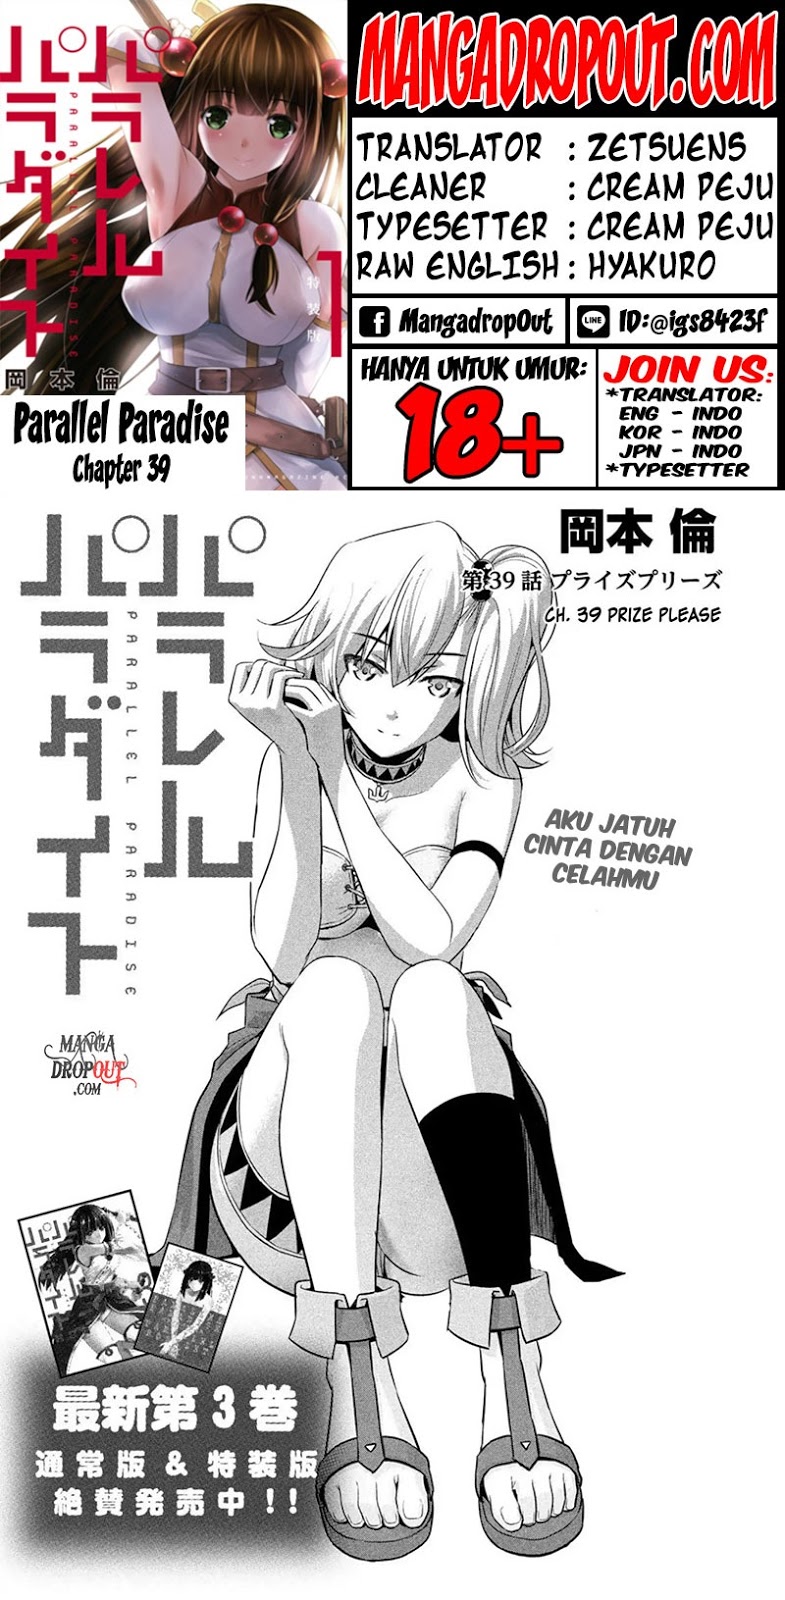 Parallel Paradise Chapter 39